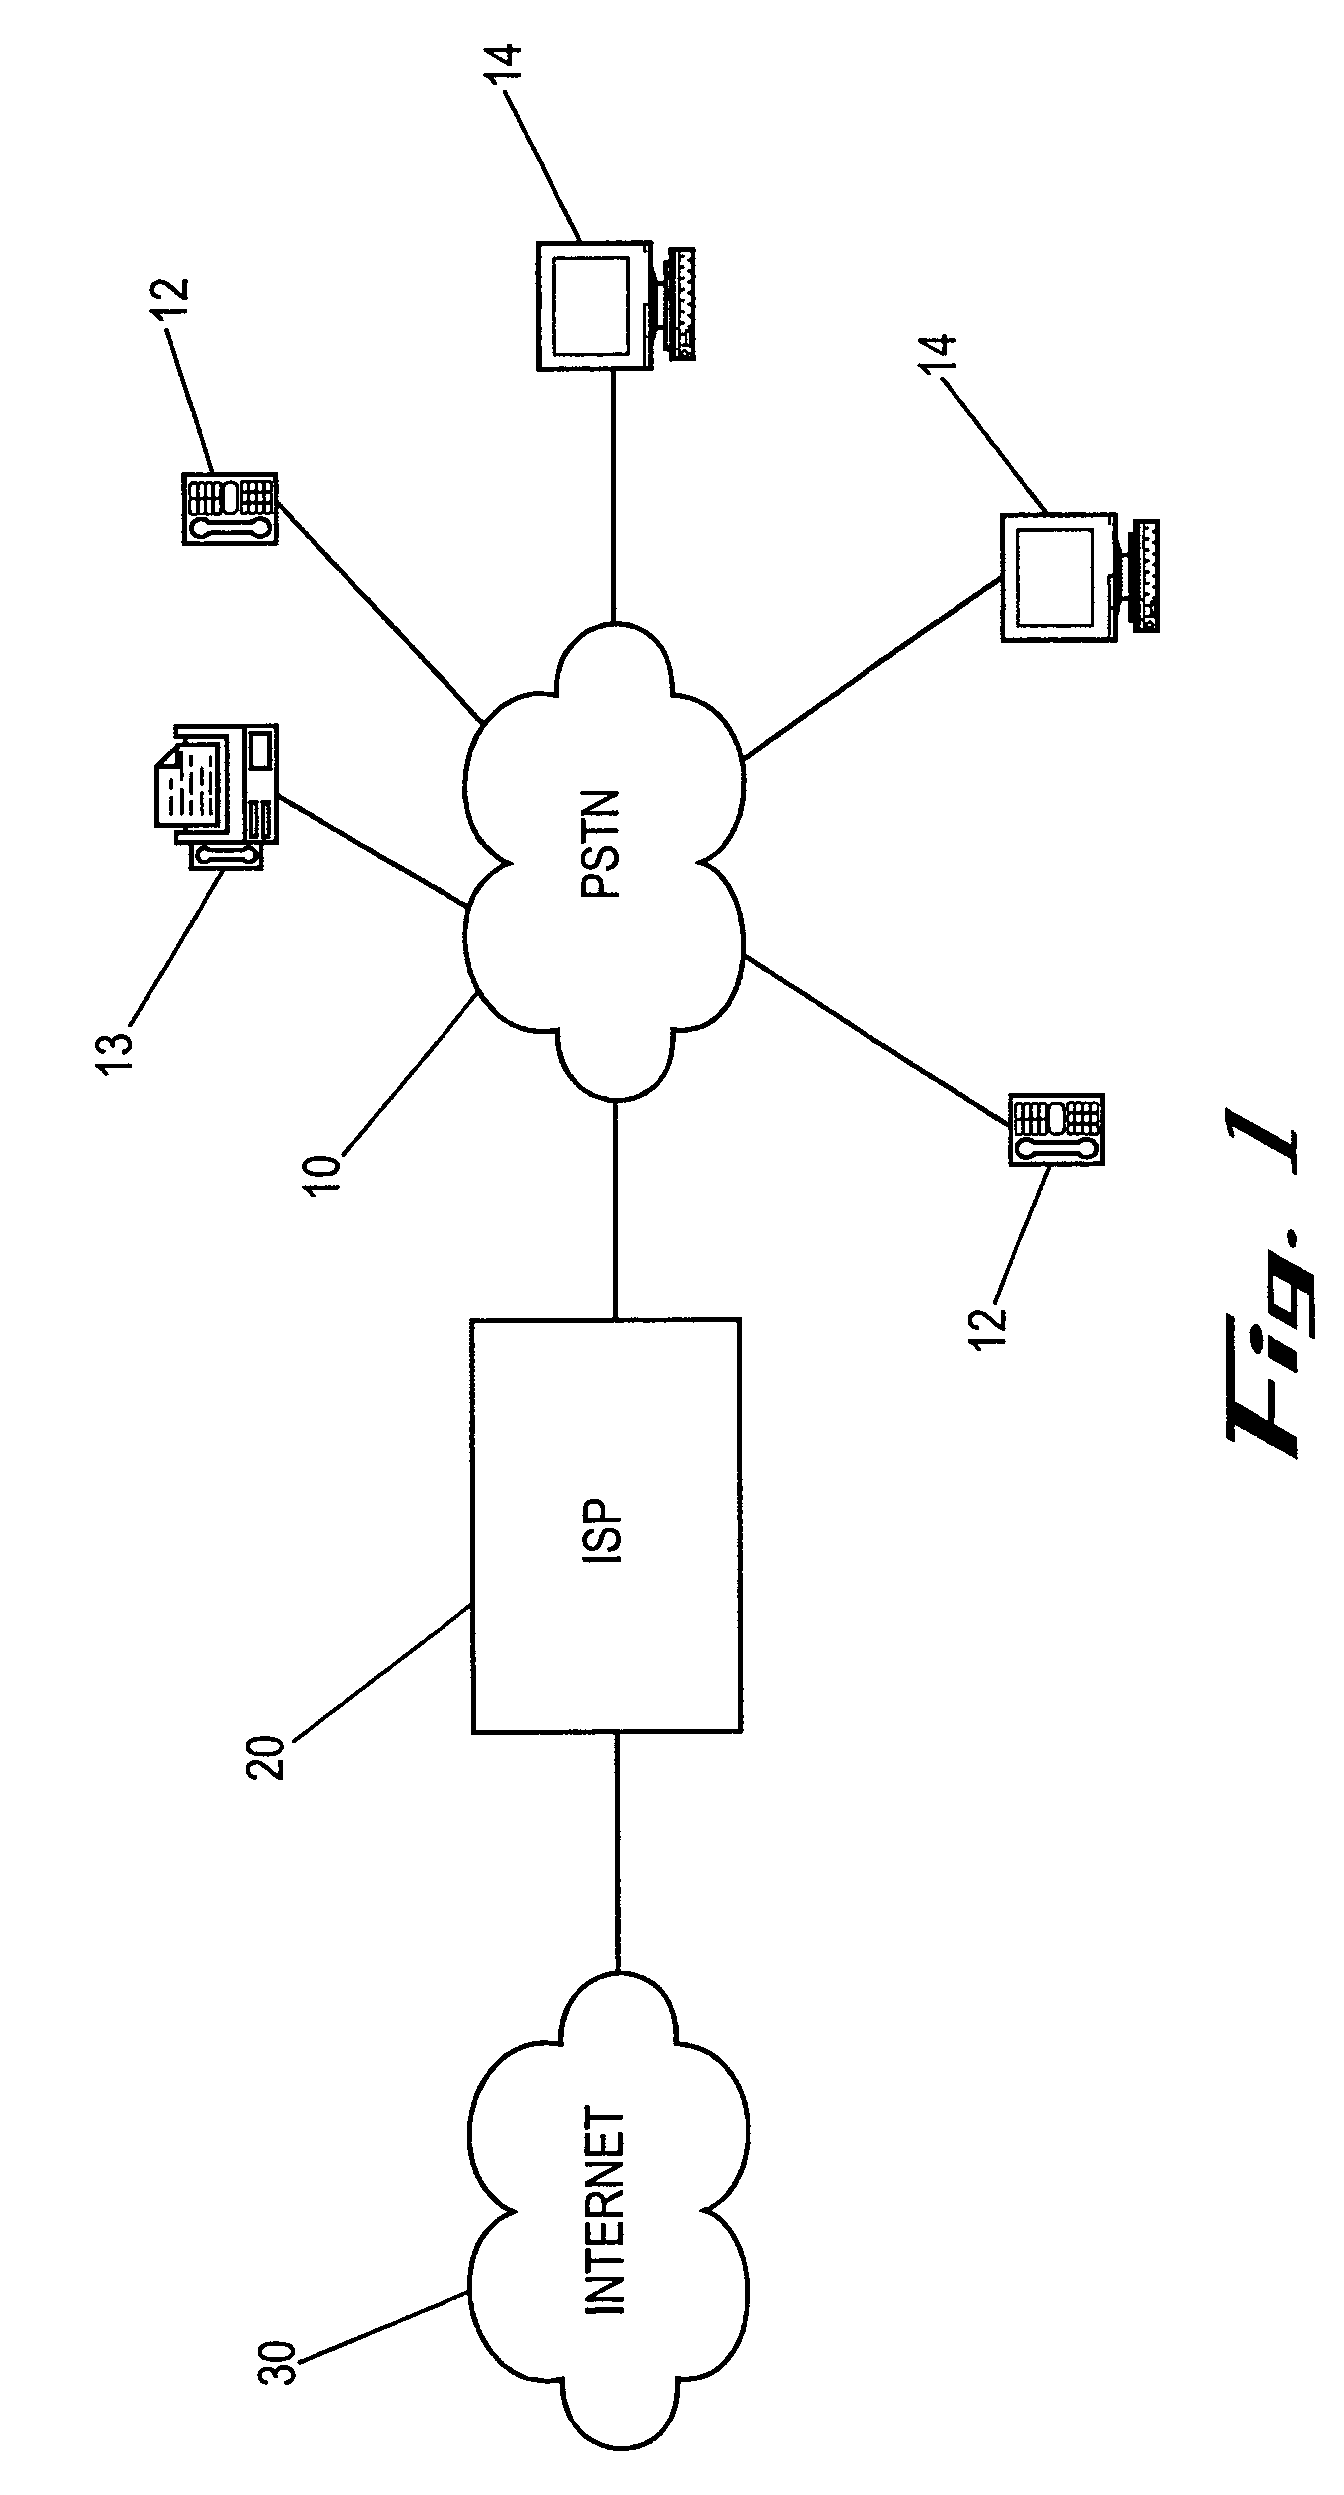 Networks, systems and methods for routing data traffic within a telephone network based on available resources